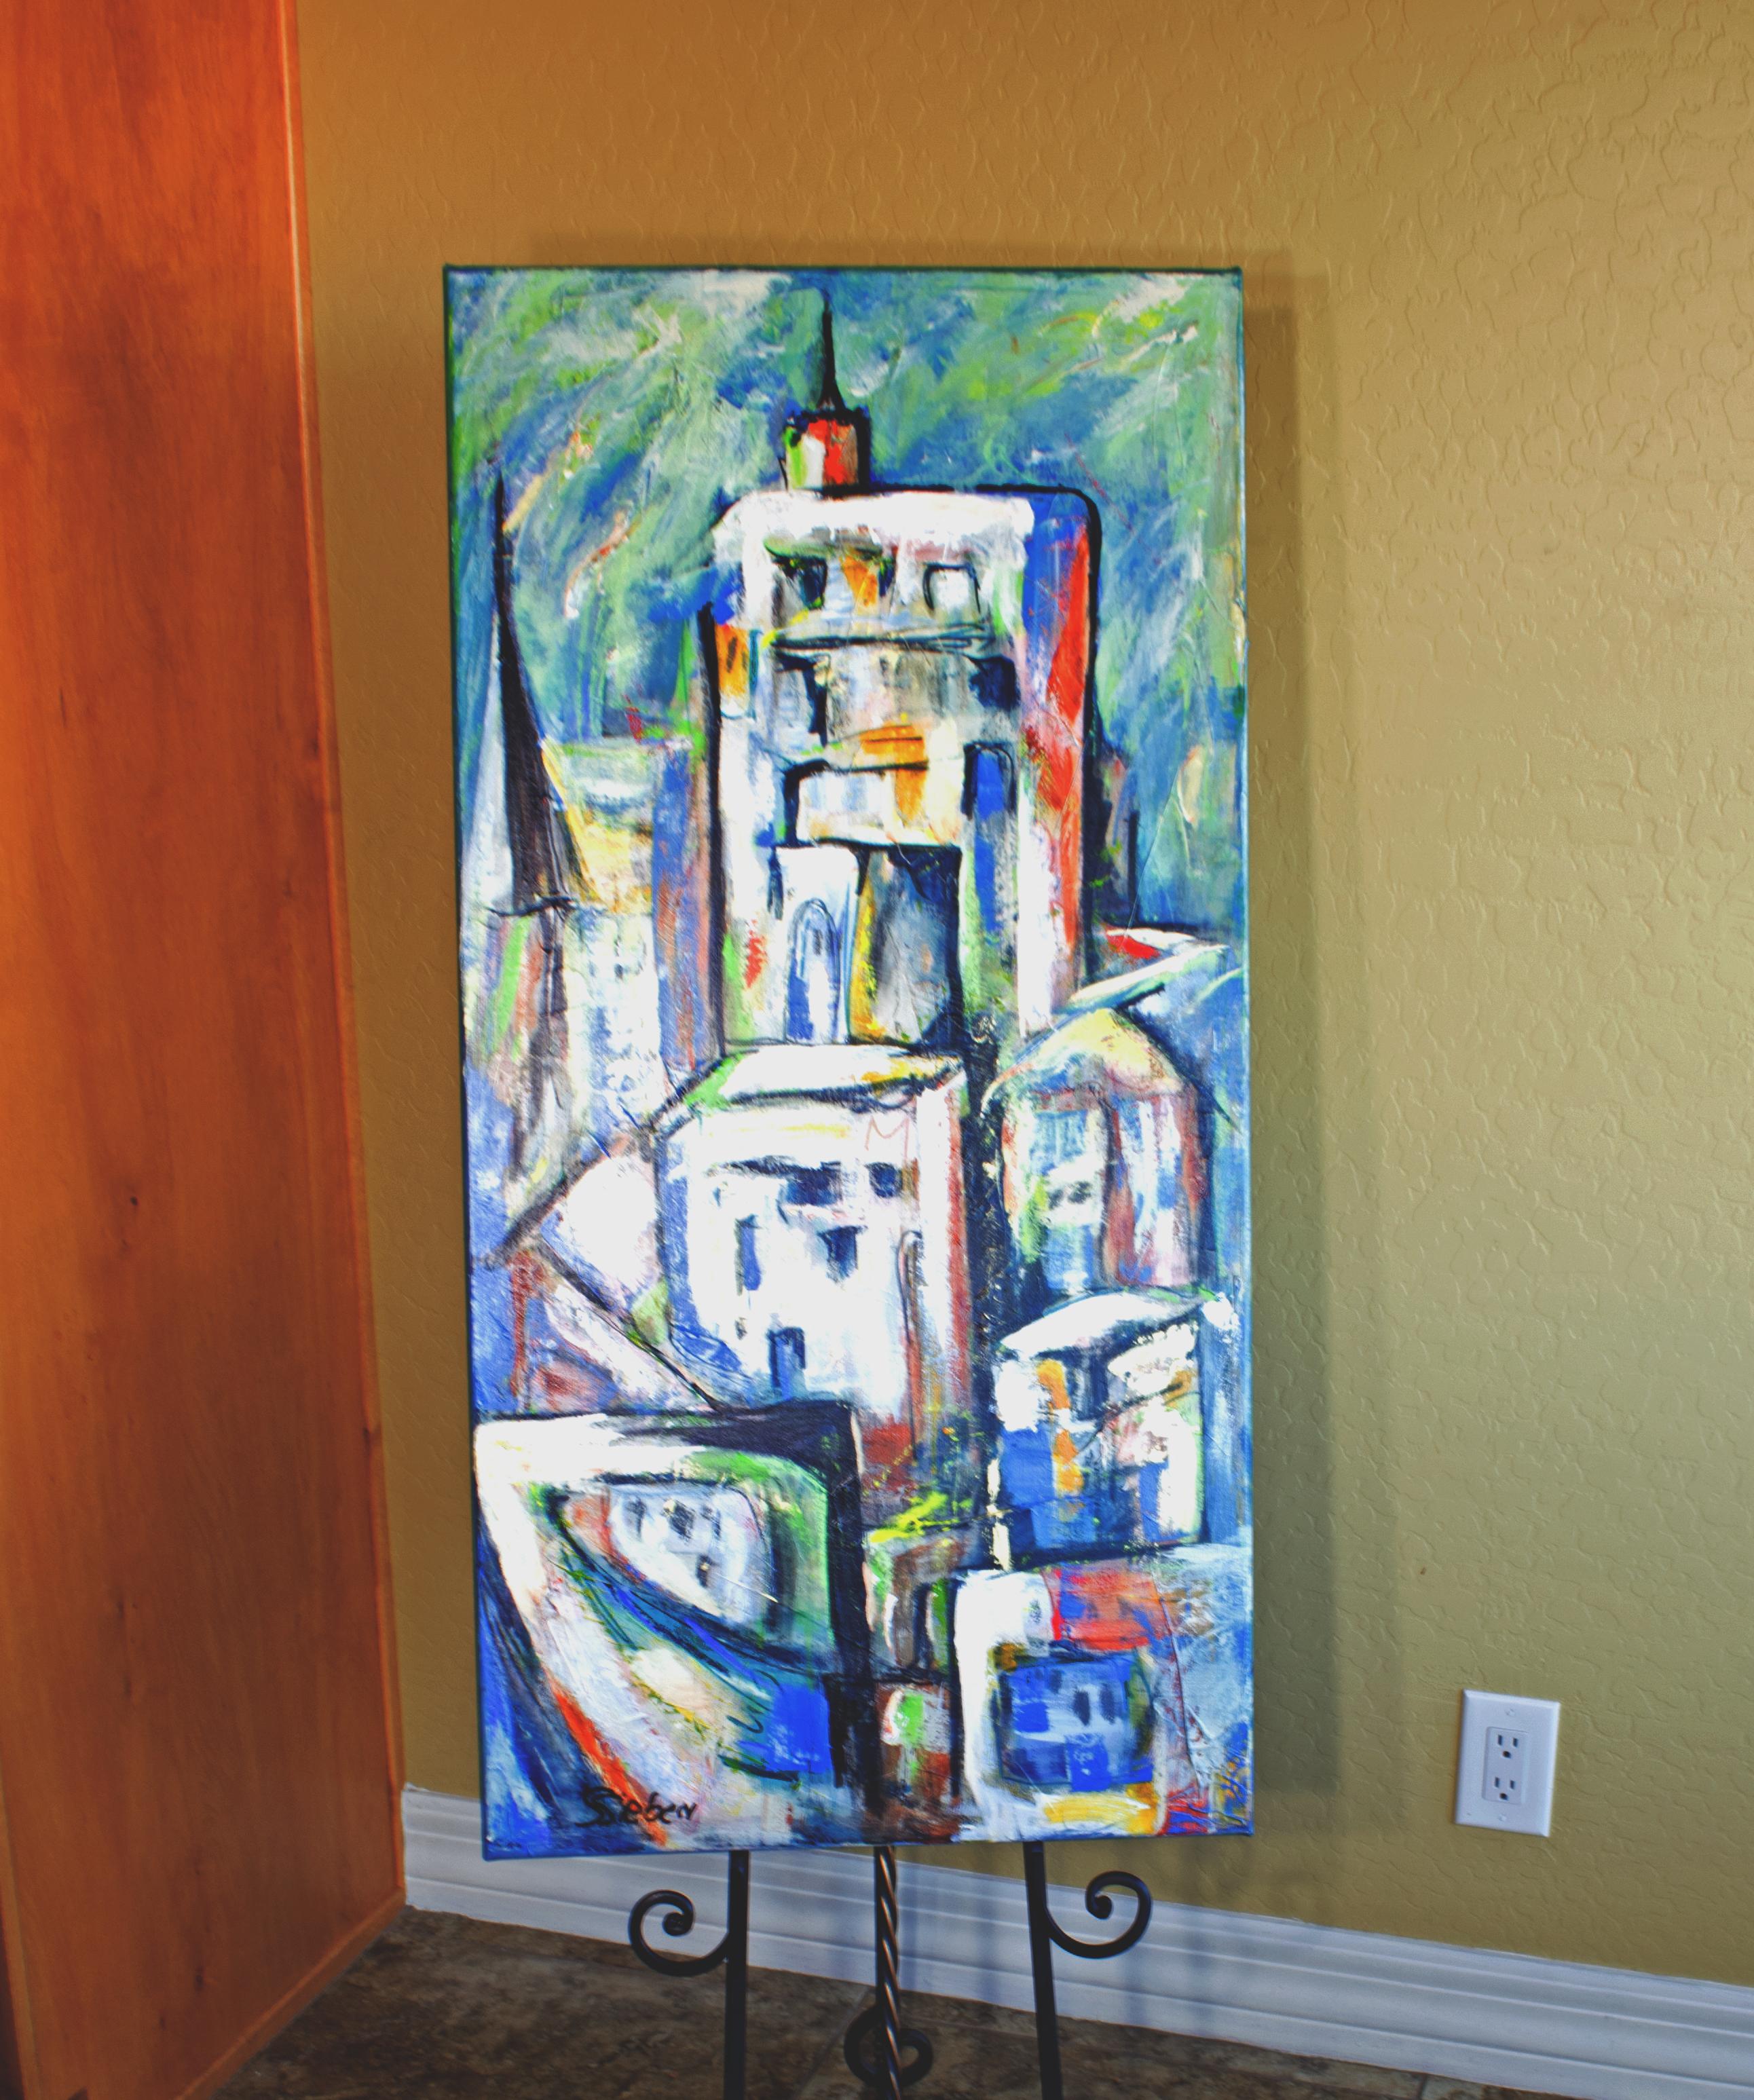 <p>Artist Comments<br>Colorful buildings and lights create an expressive gathering of city skyscrapers.</p><br/><p>About the Artist<br>Sharon Sieben prefers working in a loose, fluid technique and finds inspiration in the most unexpected things. Her